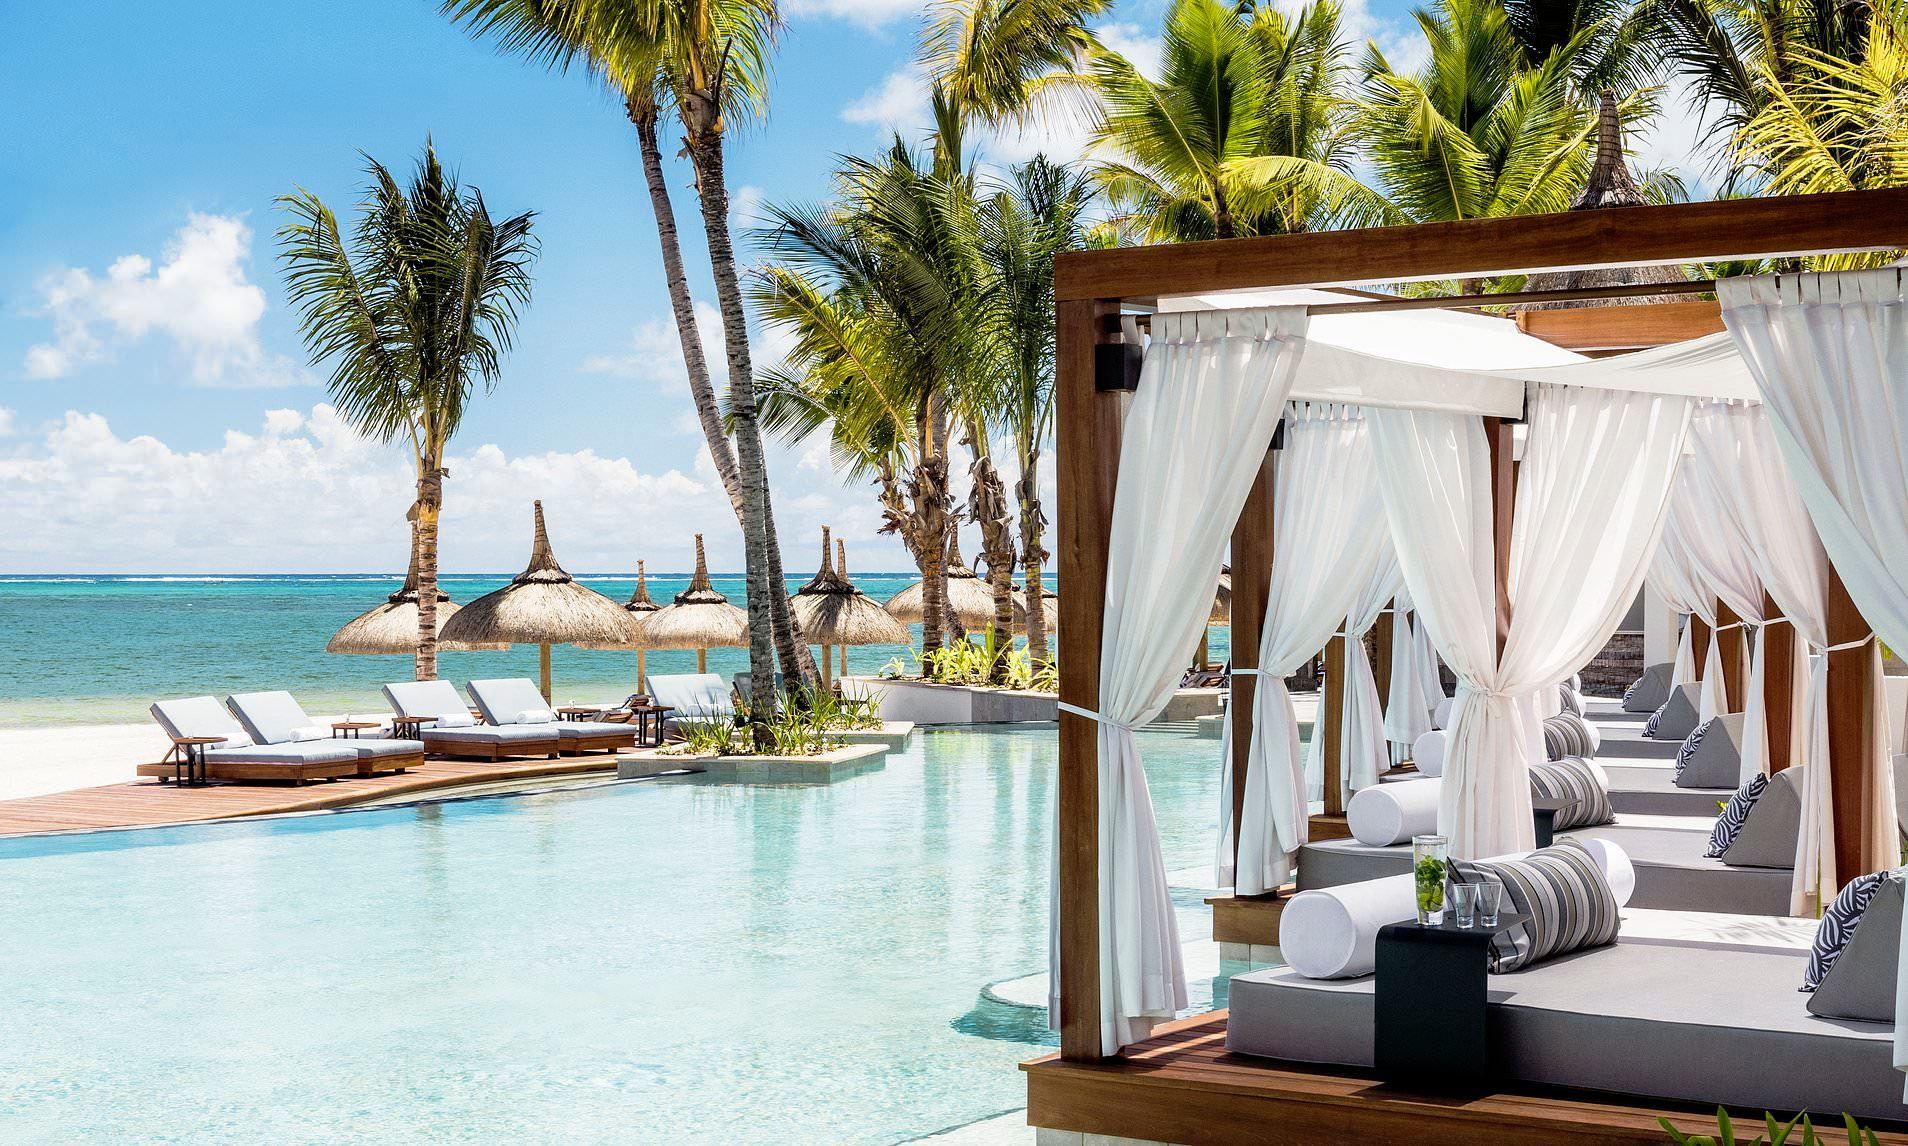 Top 5 Halal Friendly Hotels in Mauritius (2021)